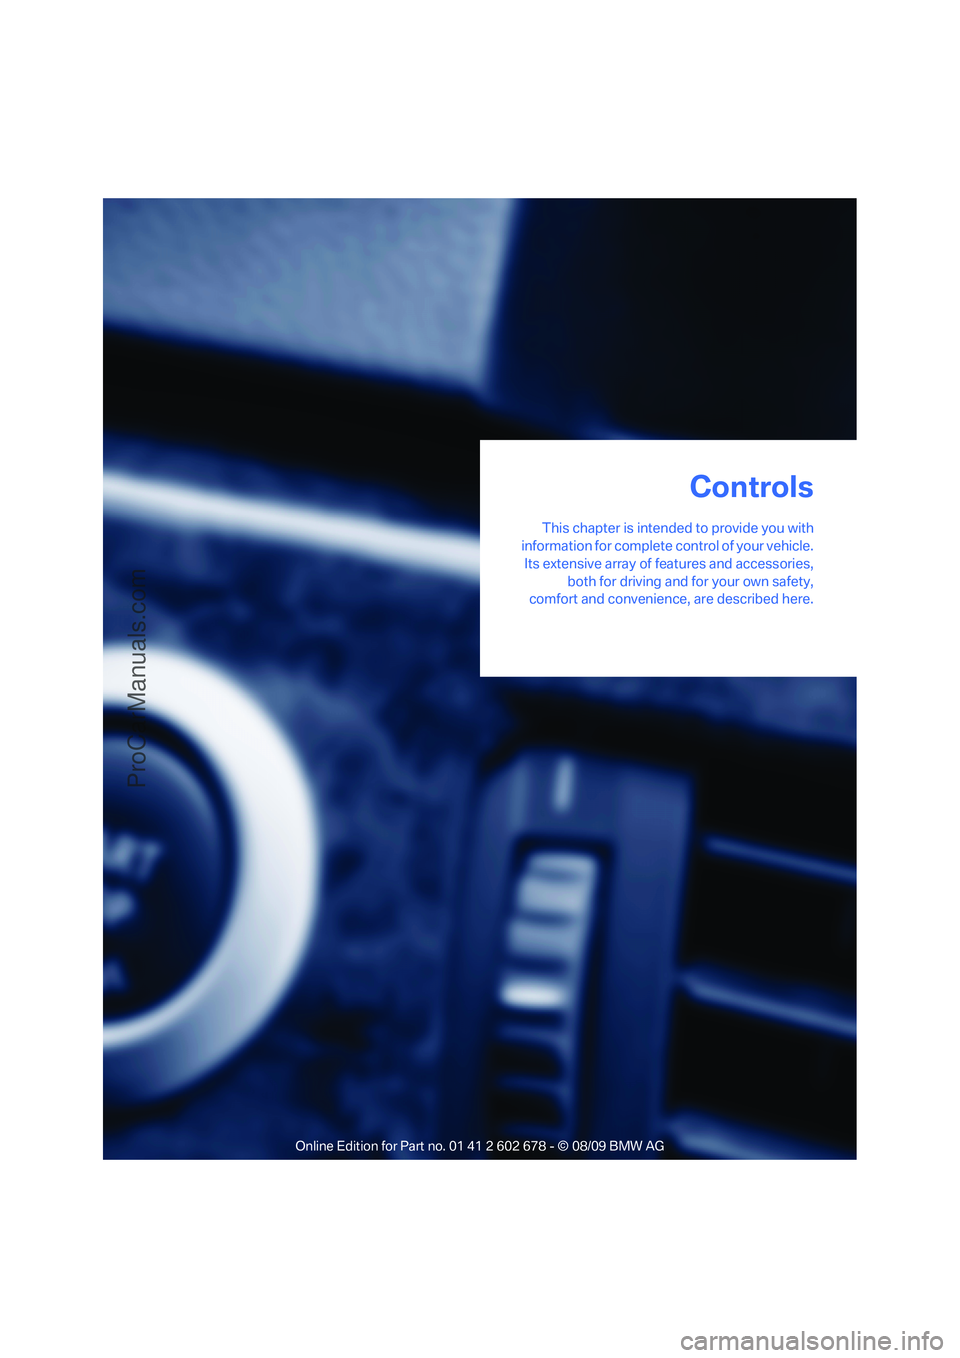 BMW 5 SERIES 2010 Owners Manual Controls
This chapter is intended to provide you with
information for complete control of your vehicle.
Its extensive array of features and accessories,
both for driving and for your own safety,
comfo